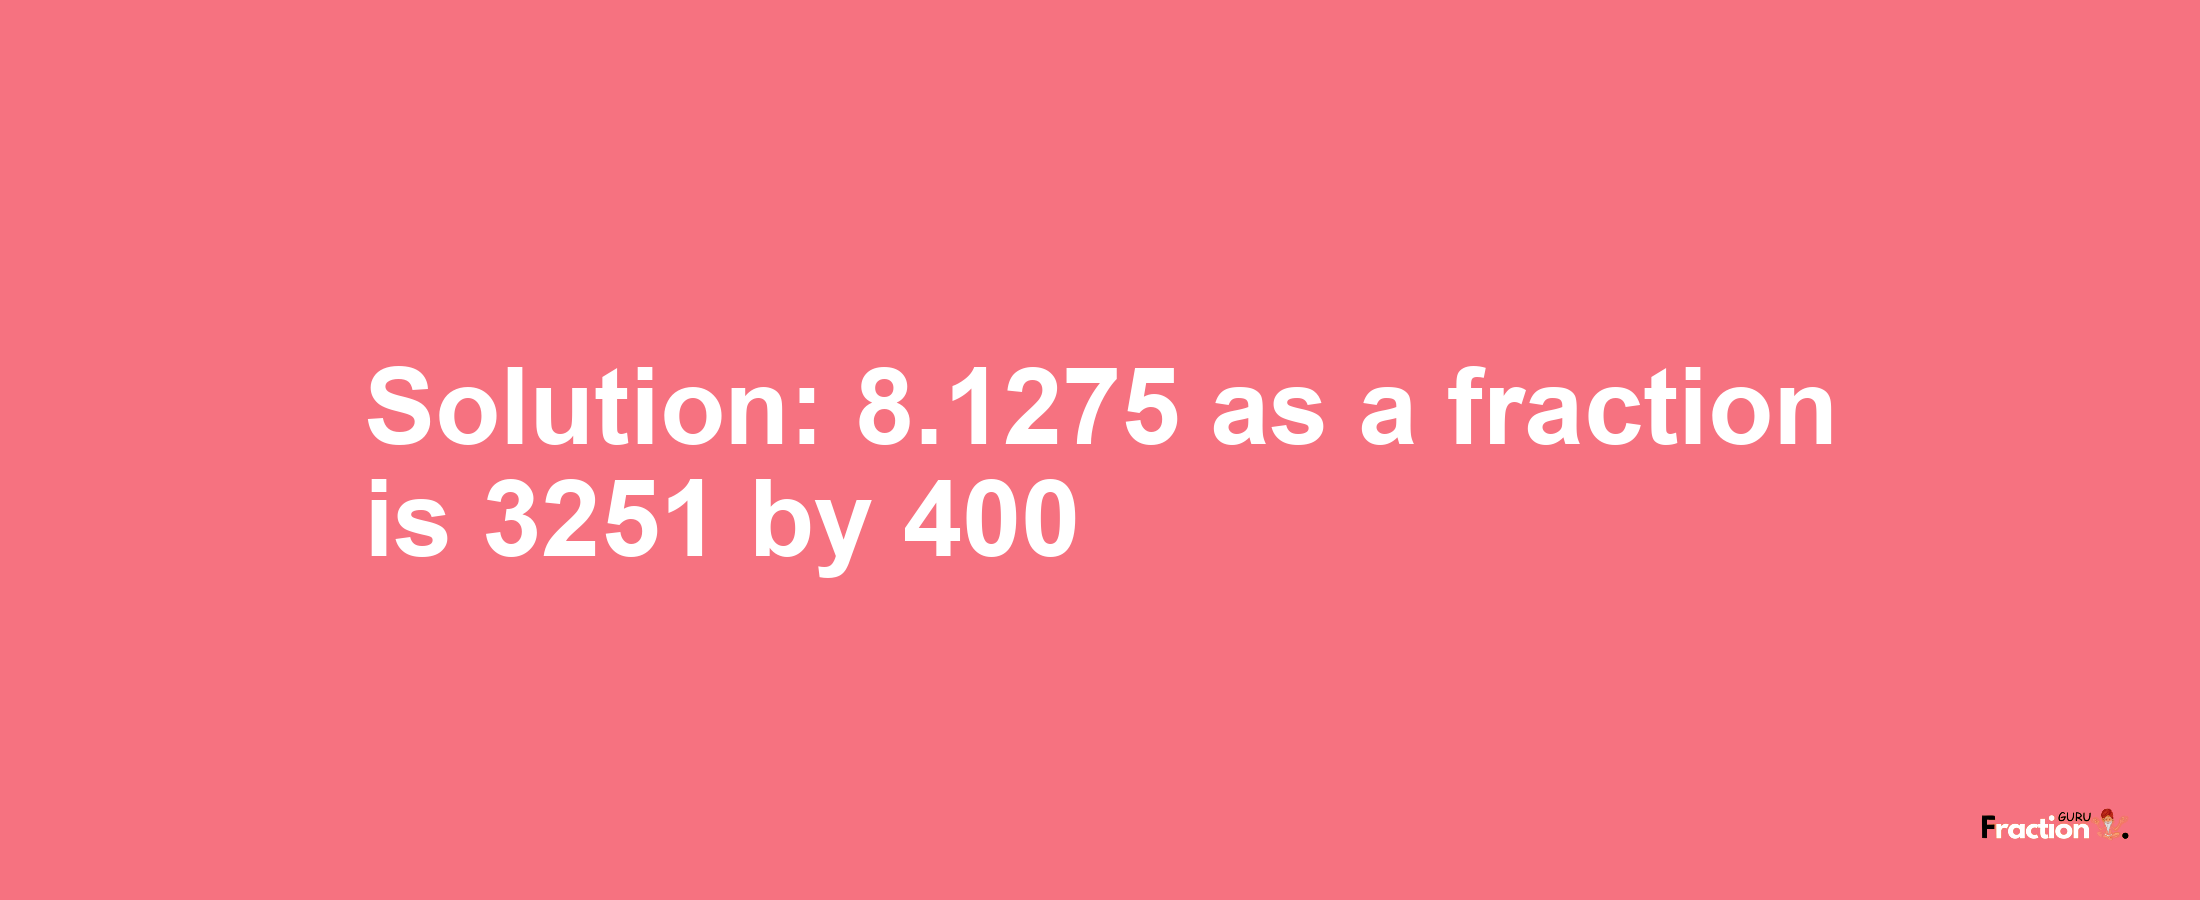 Solution:8.1275 as a fraction is 3251/400